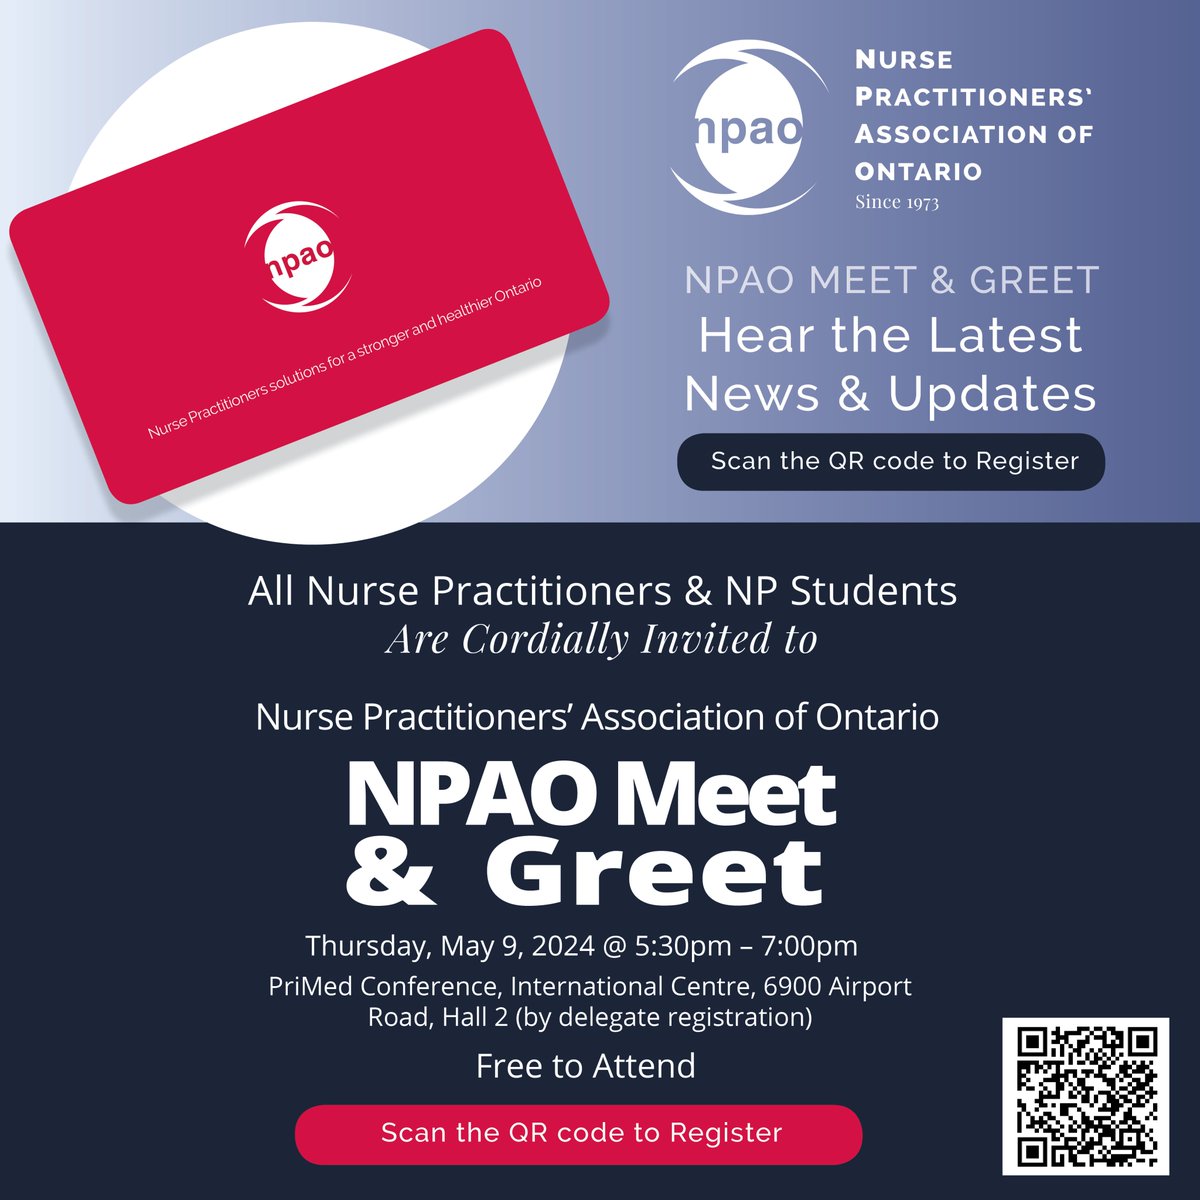 Calling all Nurse Practitioners and NP Students! Join us for the NPAO Meet & Greet at PriMed 2024 on Thursday, May 9, from 5:30 pm to 7:00 pm. Network with peers and make valuable connections. You don't need to be an NPAO member to attend! Register now: npao.org/calendar.../np…